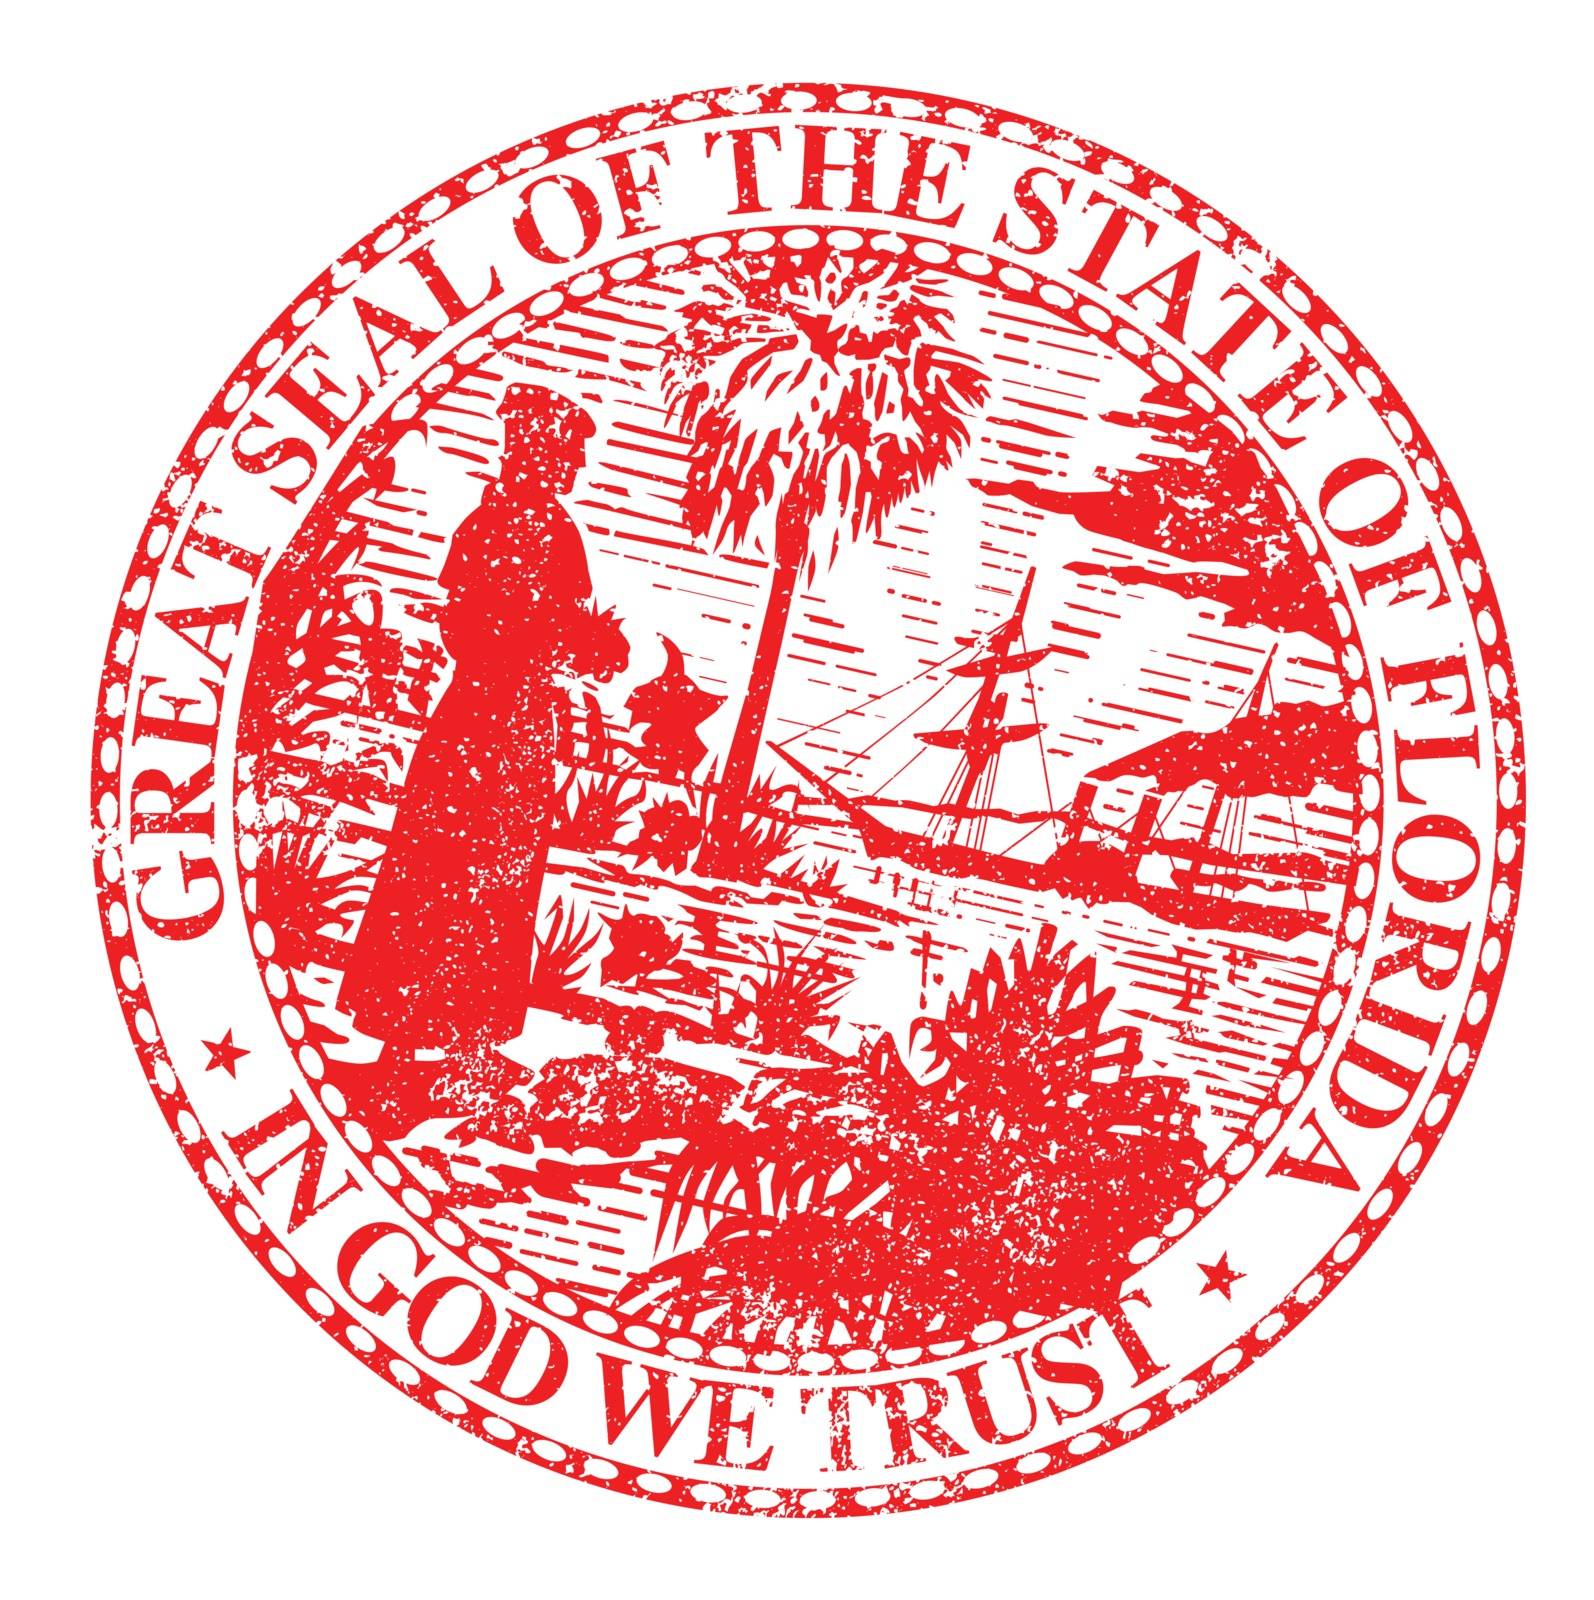 The seal of the United States of American state FLORIDA isolated on a white background.